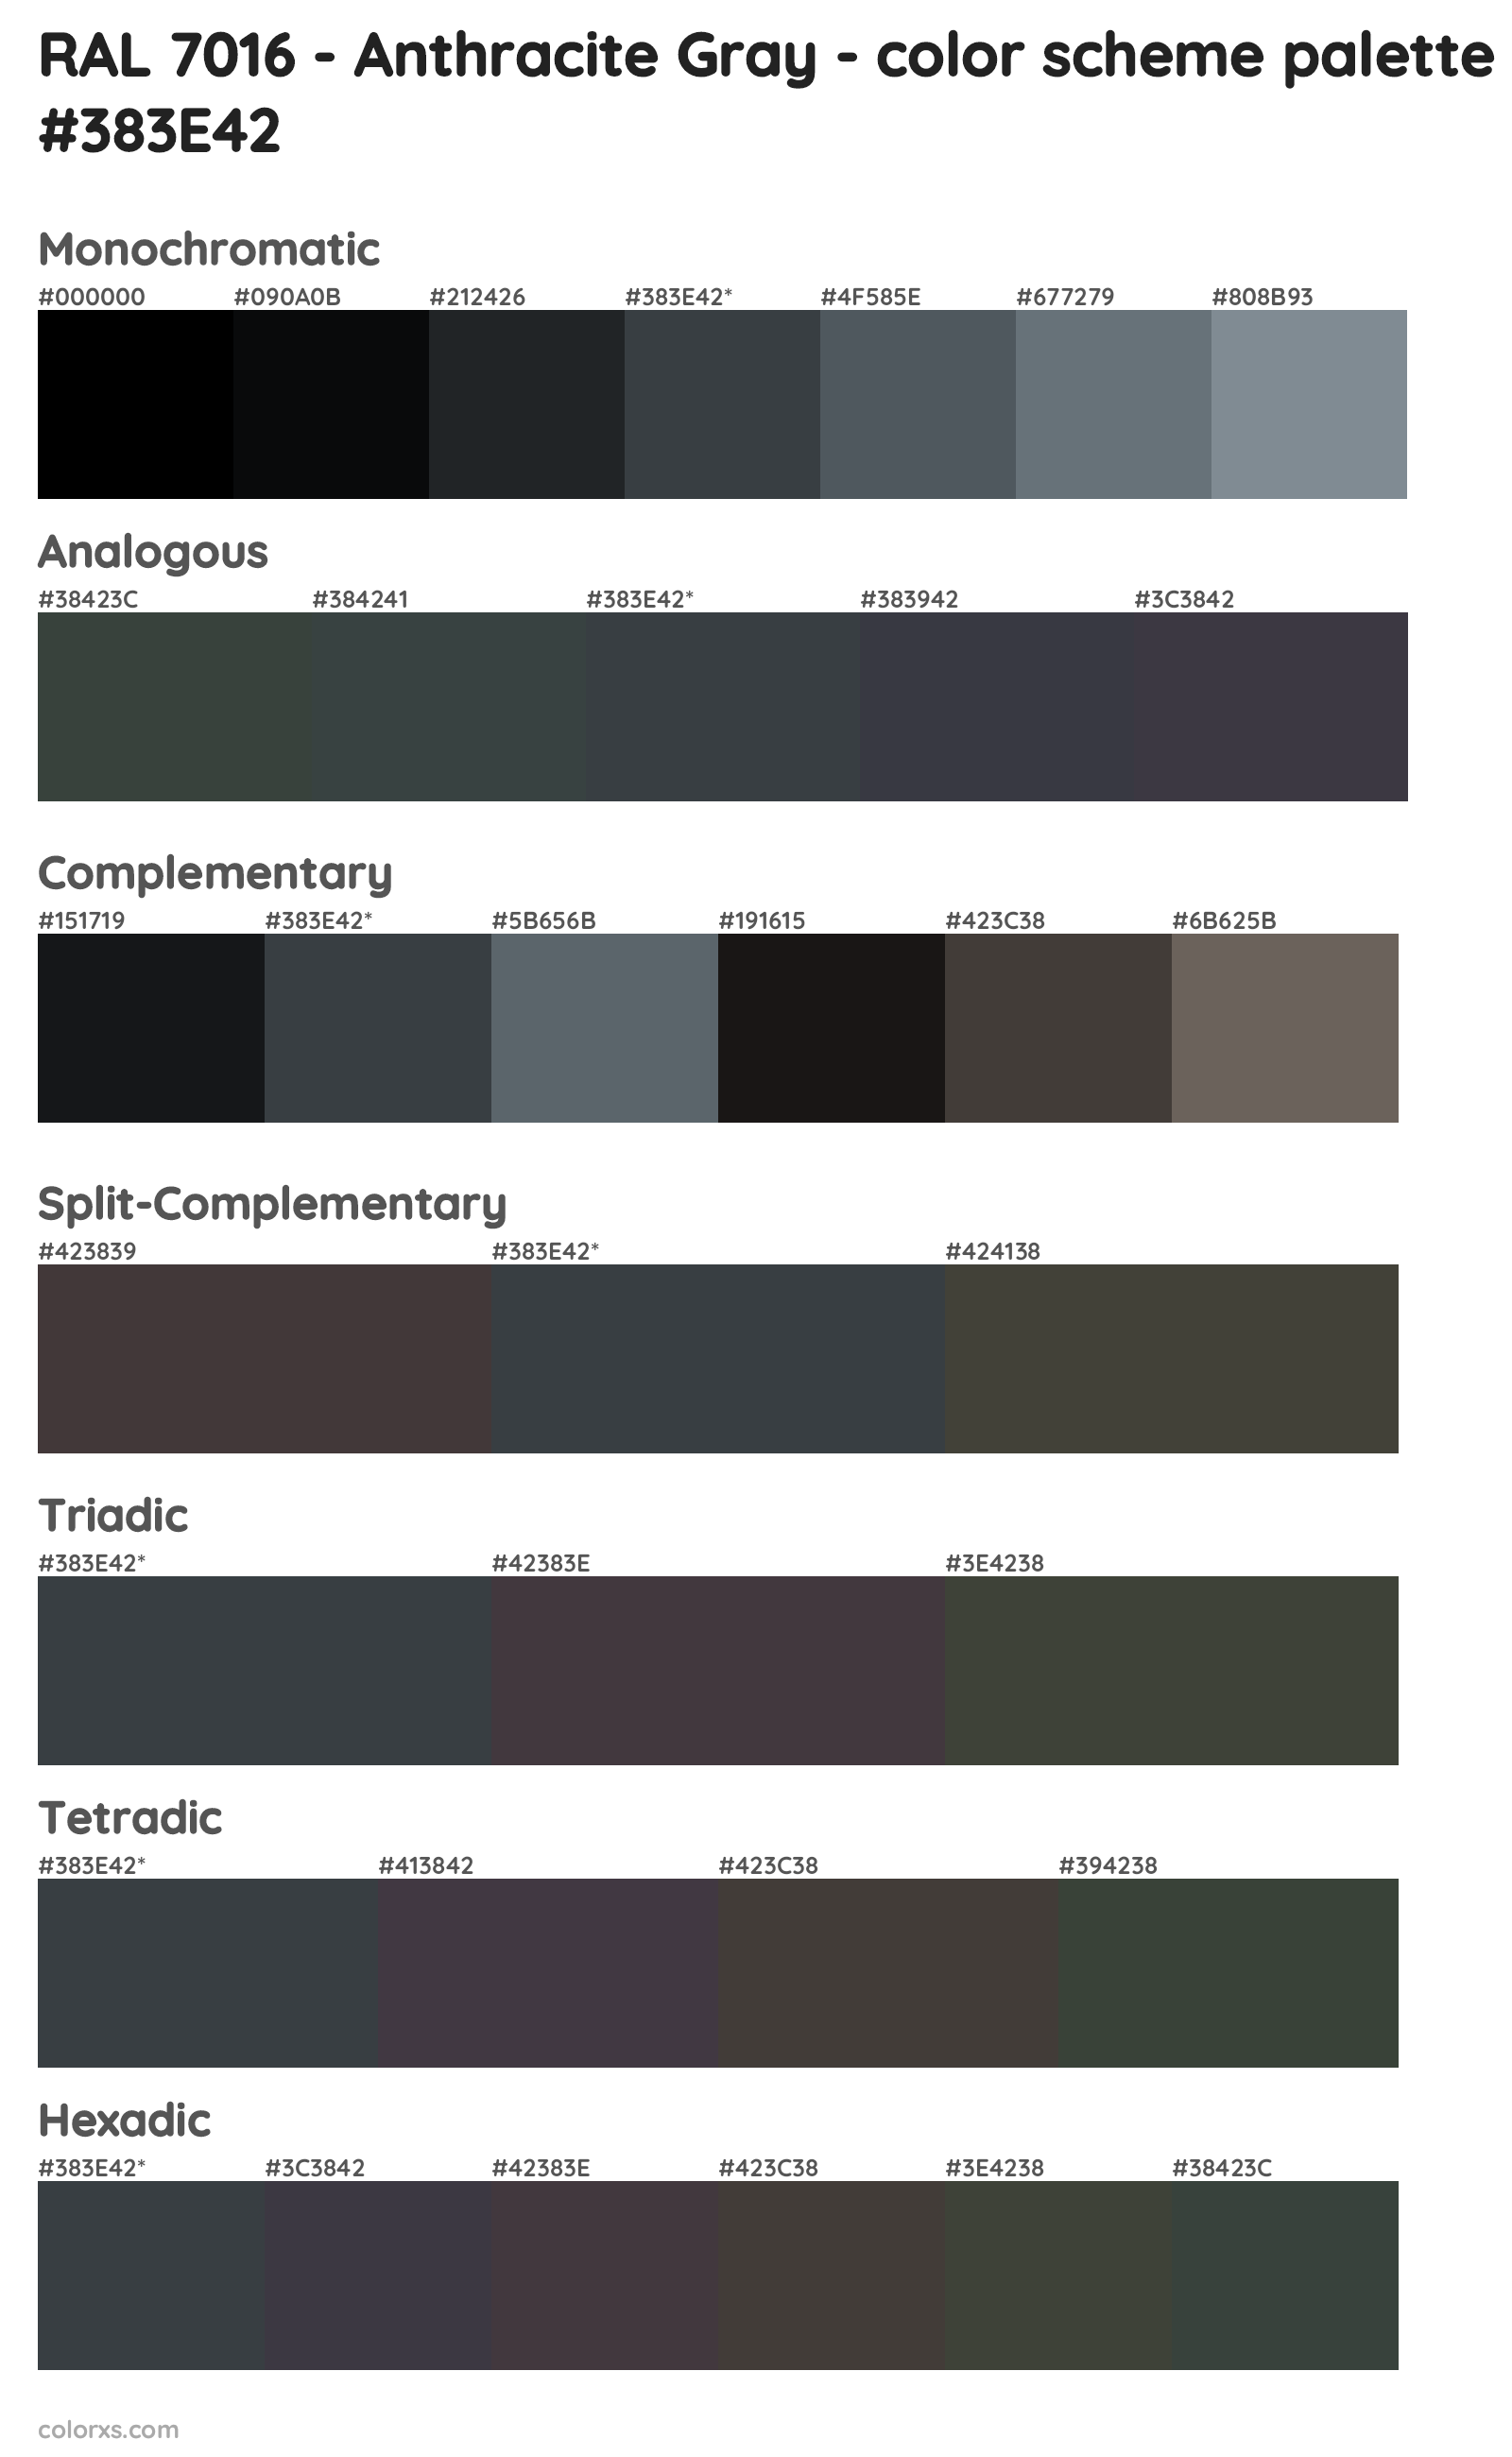 RAL 7016 - Anthracite Gray Color Scheme Palettes